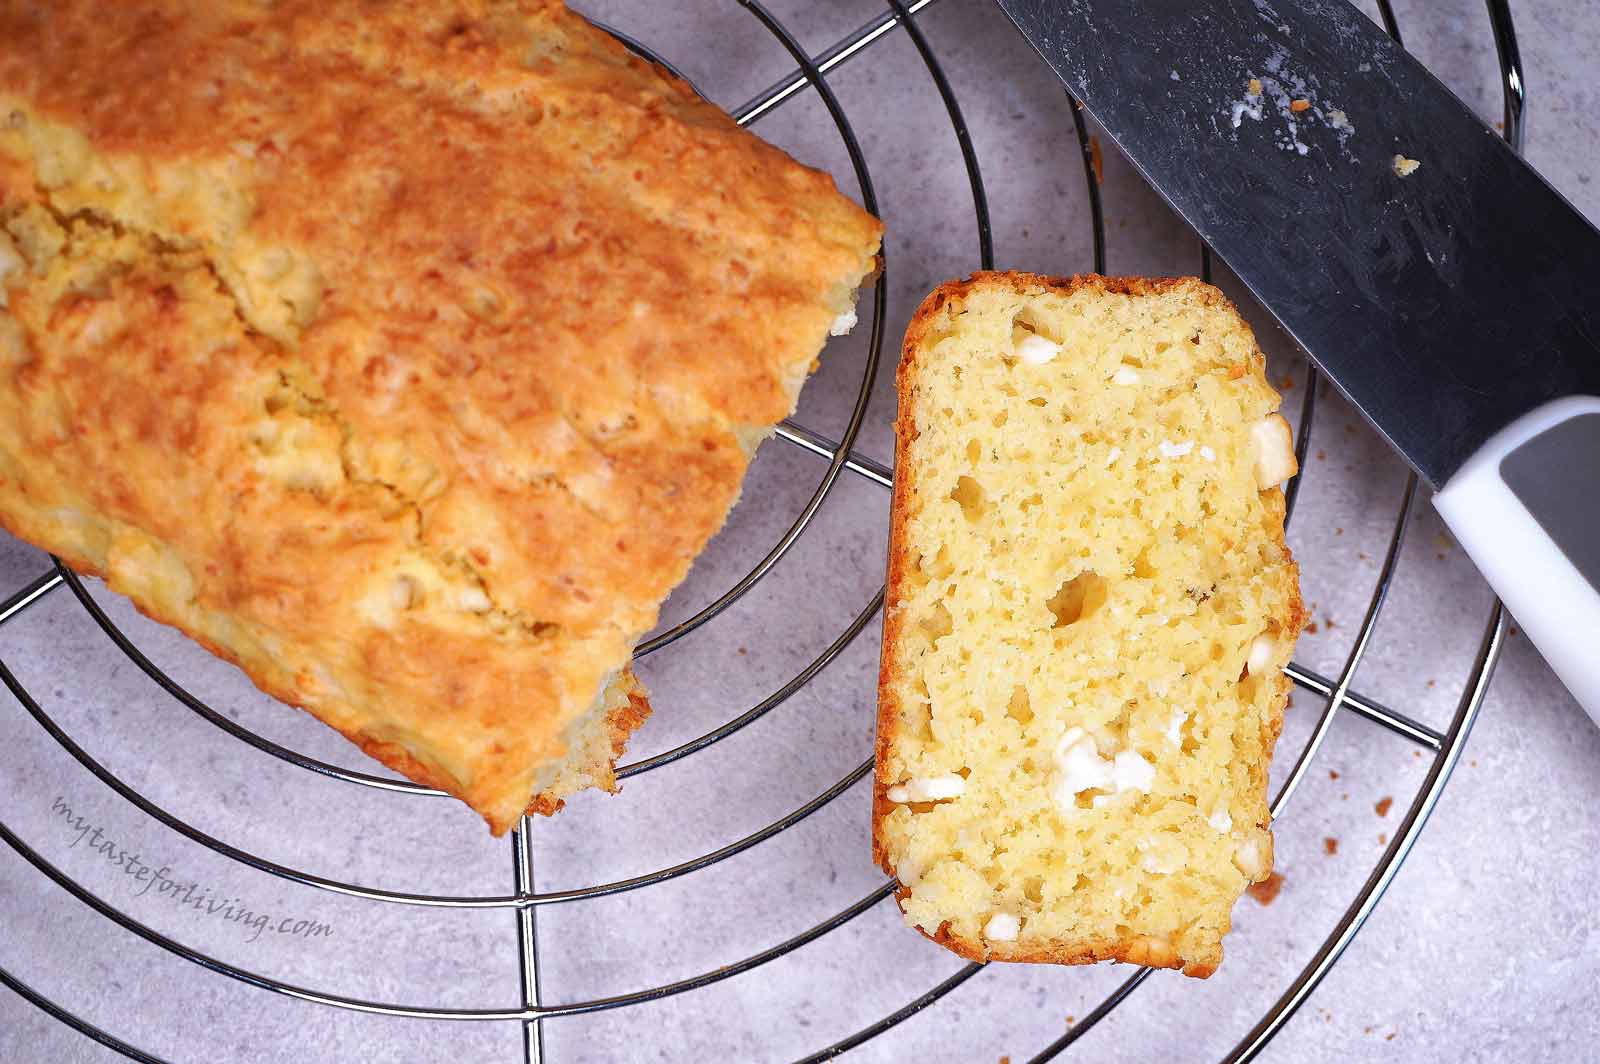 Today I offer you a recipe for a quick no-knead savoury cake or bread made with spelt flour and feta cheese, no yeast. It is easy to prepare at home and is suitable for a quick breakfast.